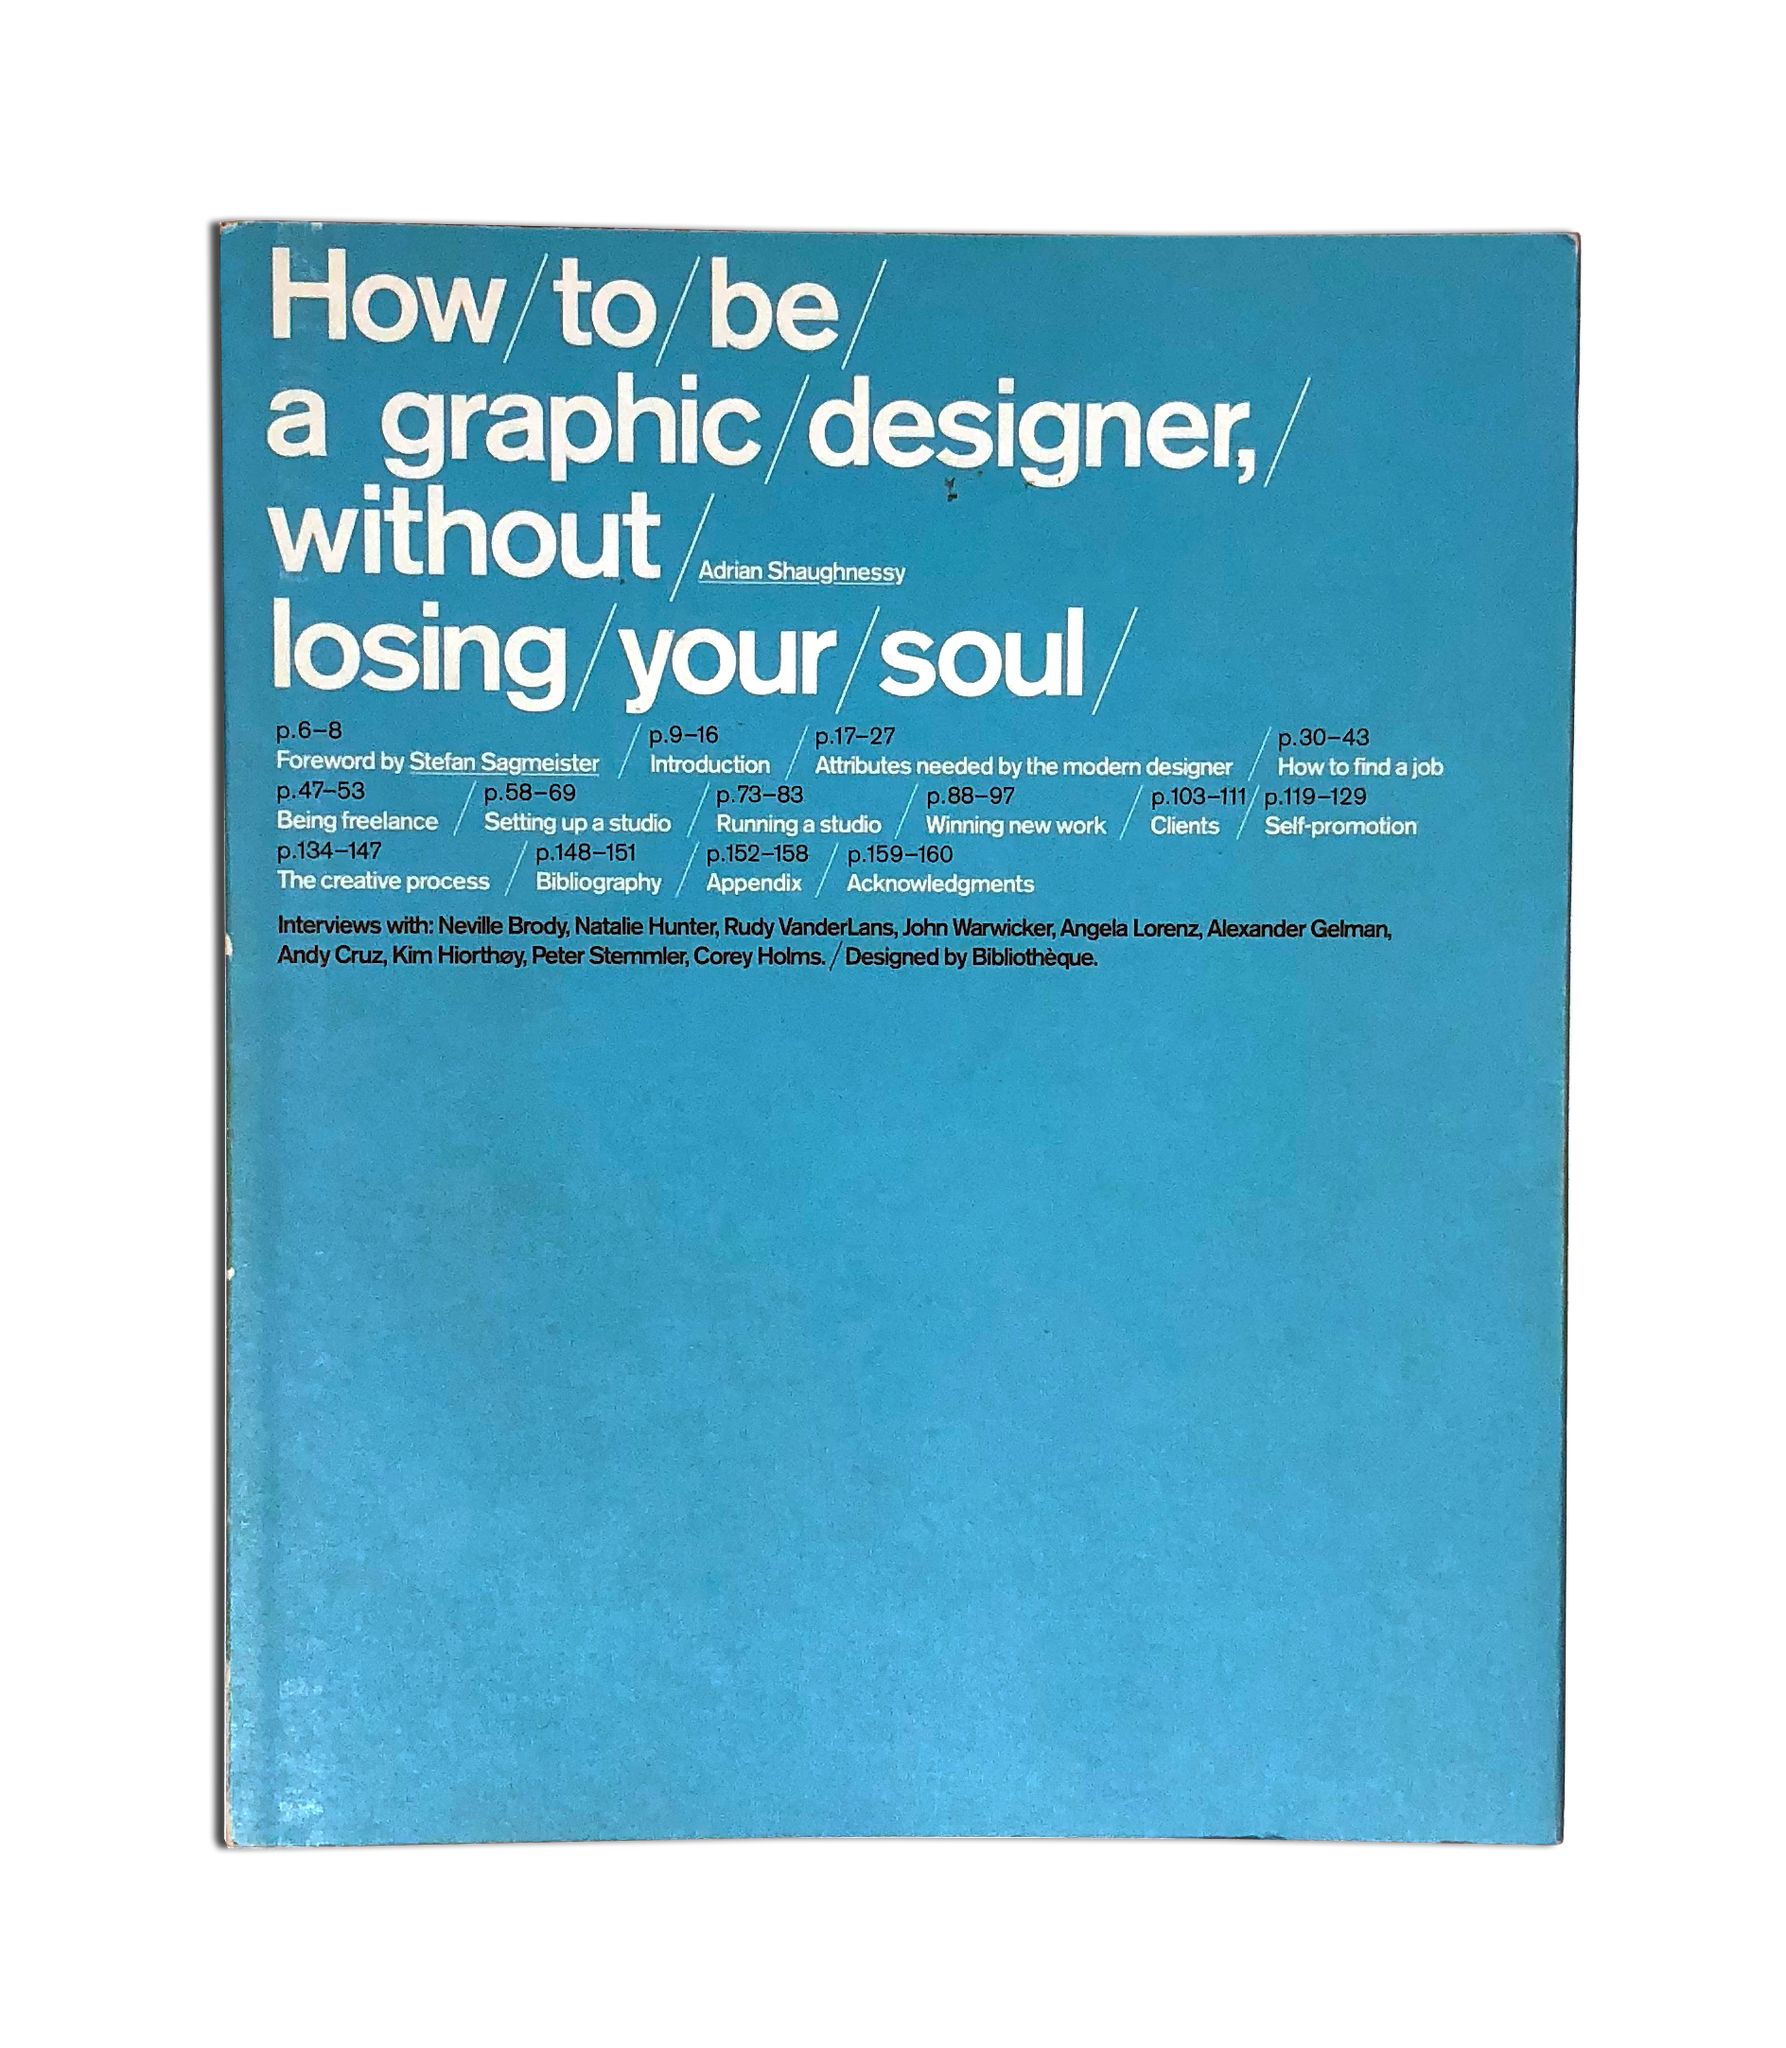 How To Be a Graphic Designer Without Losing Your Soul by Adrian Shaughnessy